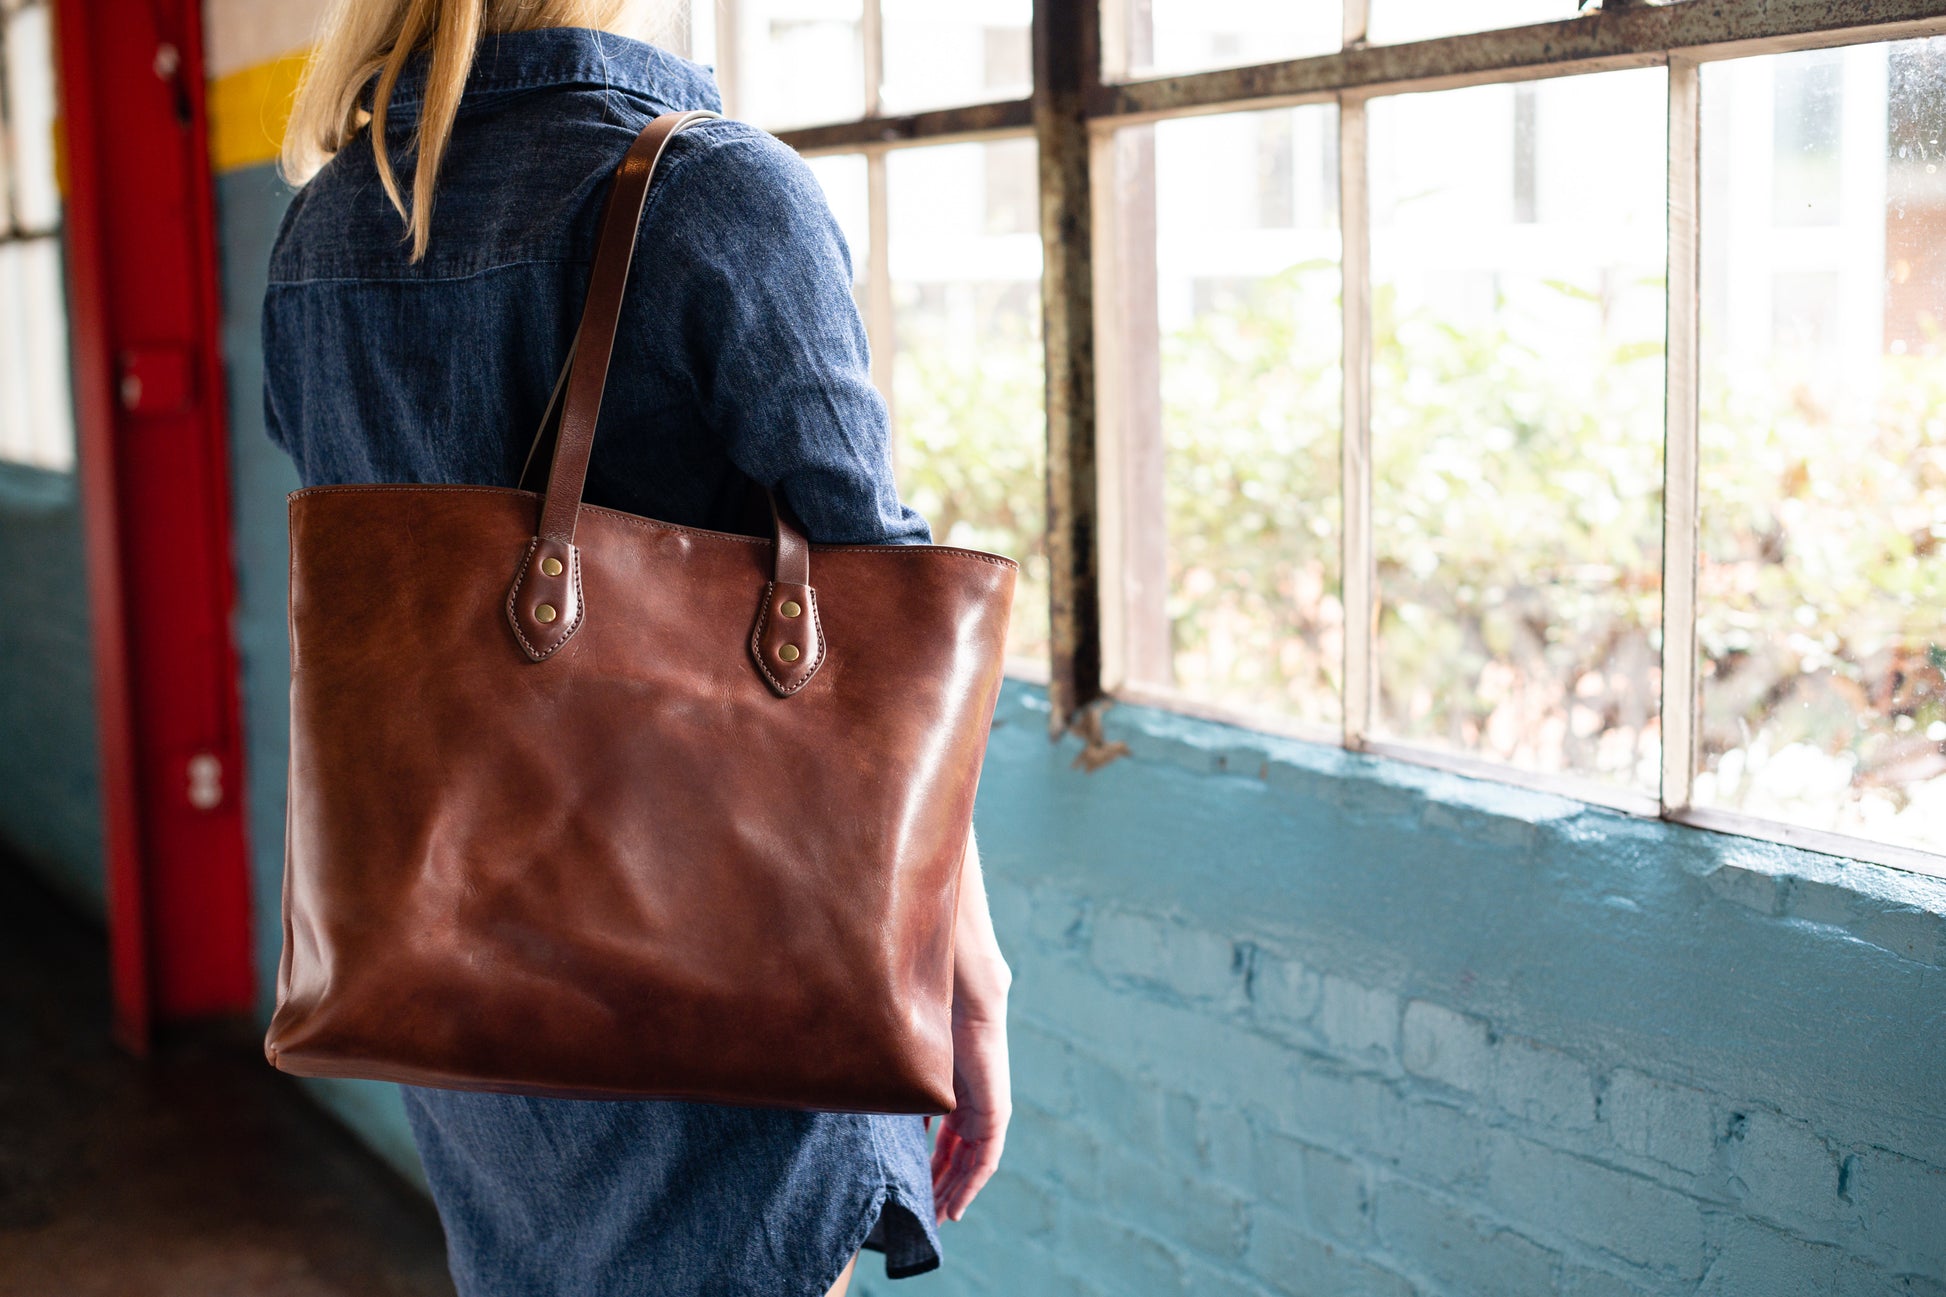 Franklin Market Tote Bag by Jackson Wayne - full grain leather with canvas lining